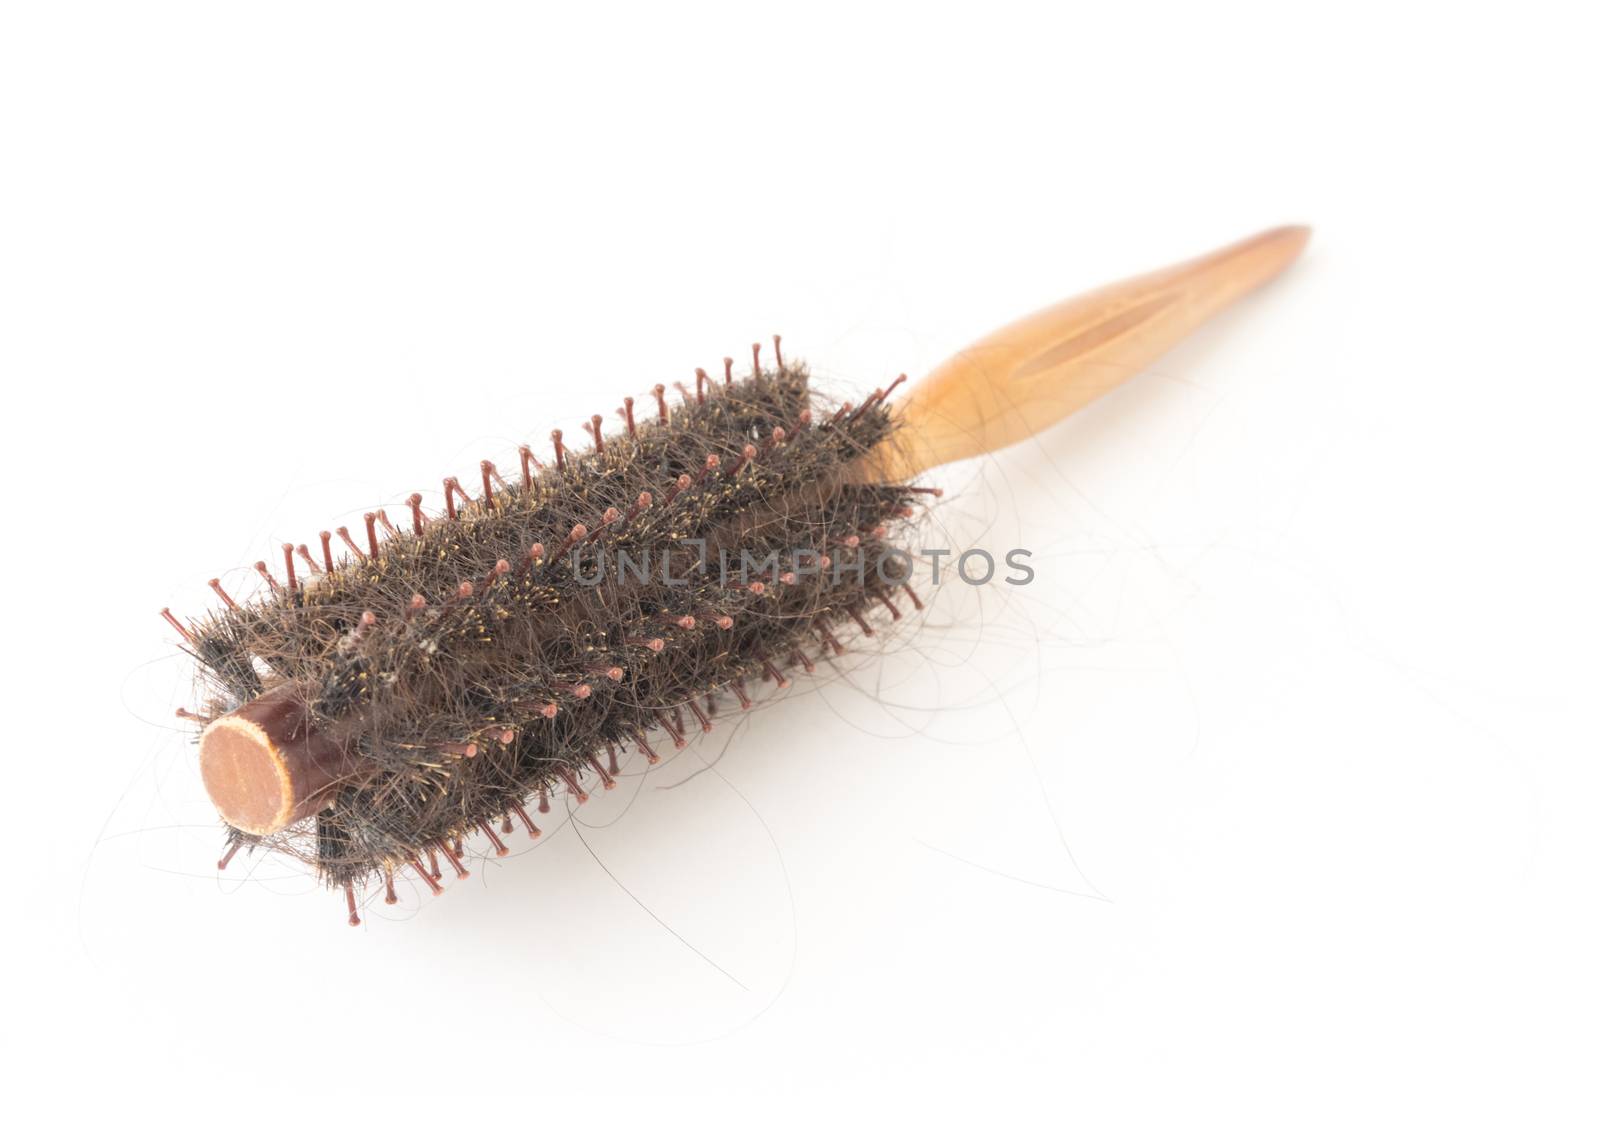 Comb brush with hair loss problem on white background, health care and medical concept